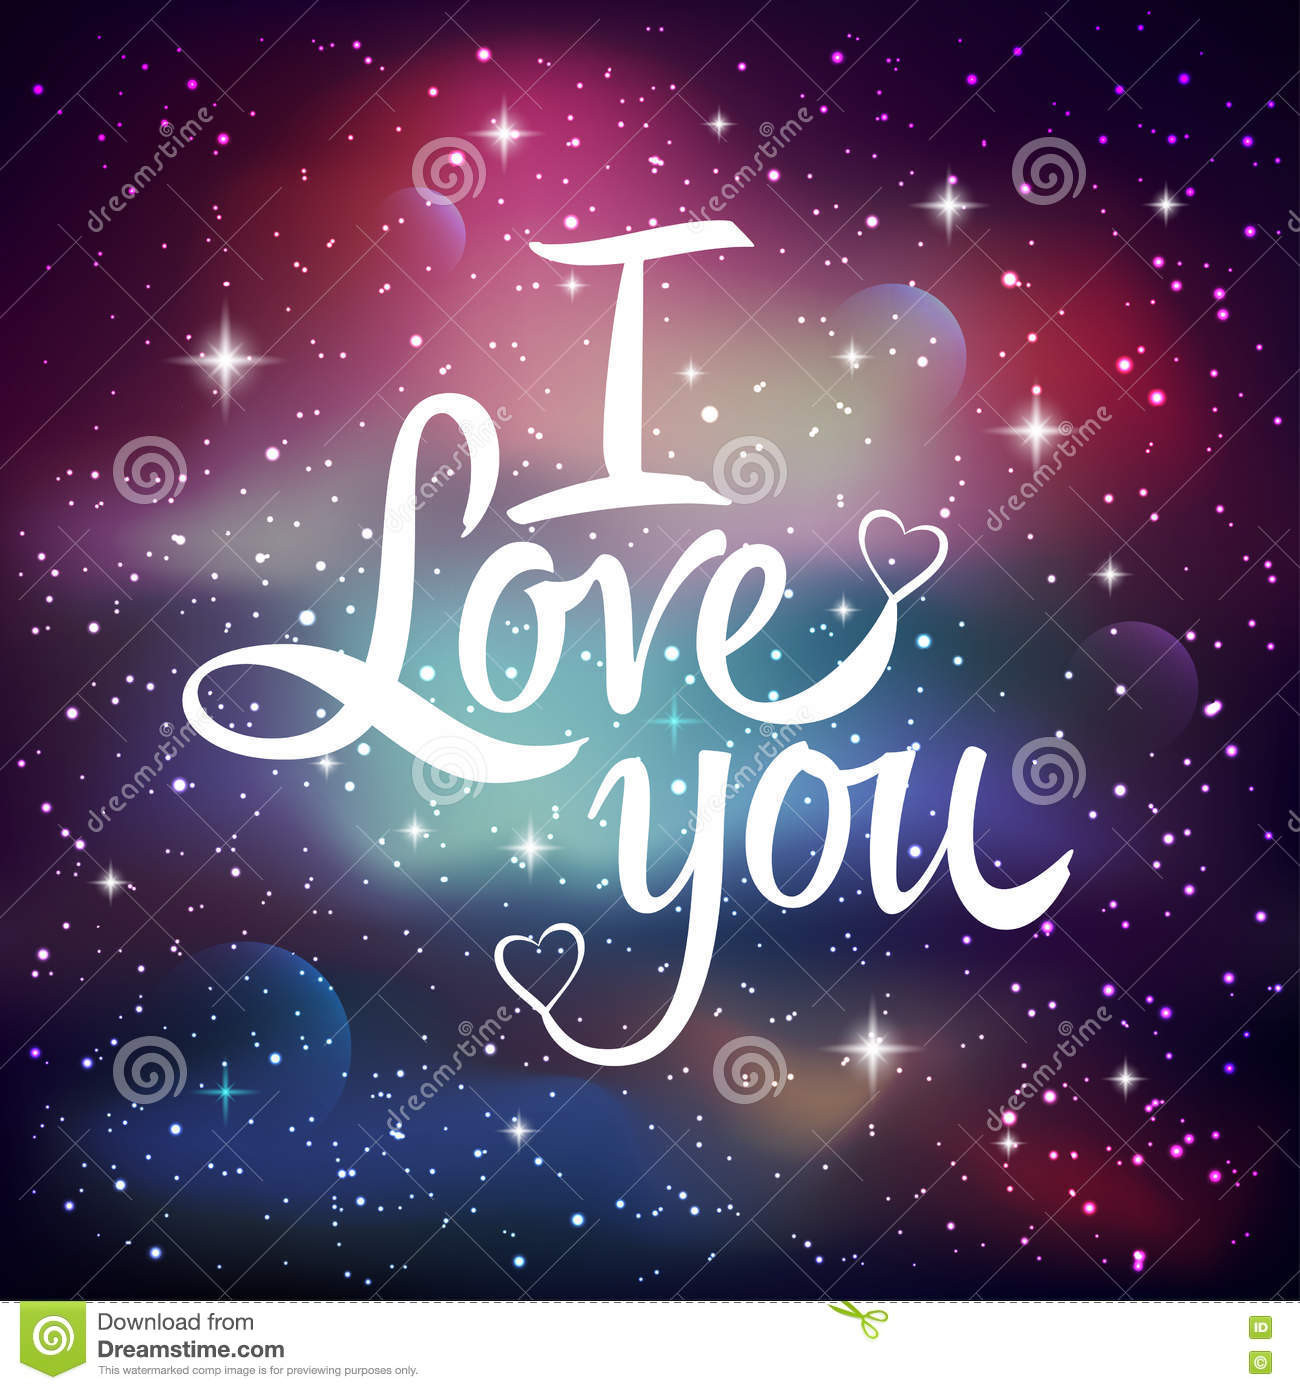 Galaxy Love Quotes
 You Are Awesome Greeting Card Stock Vector Illustration